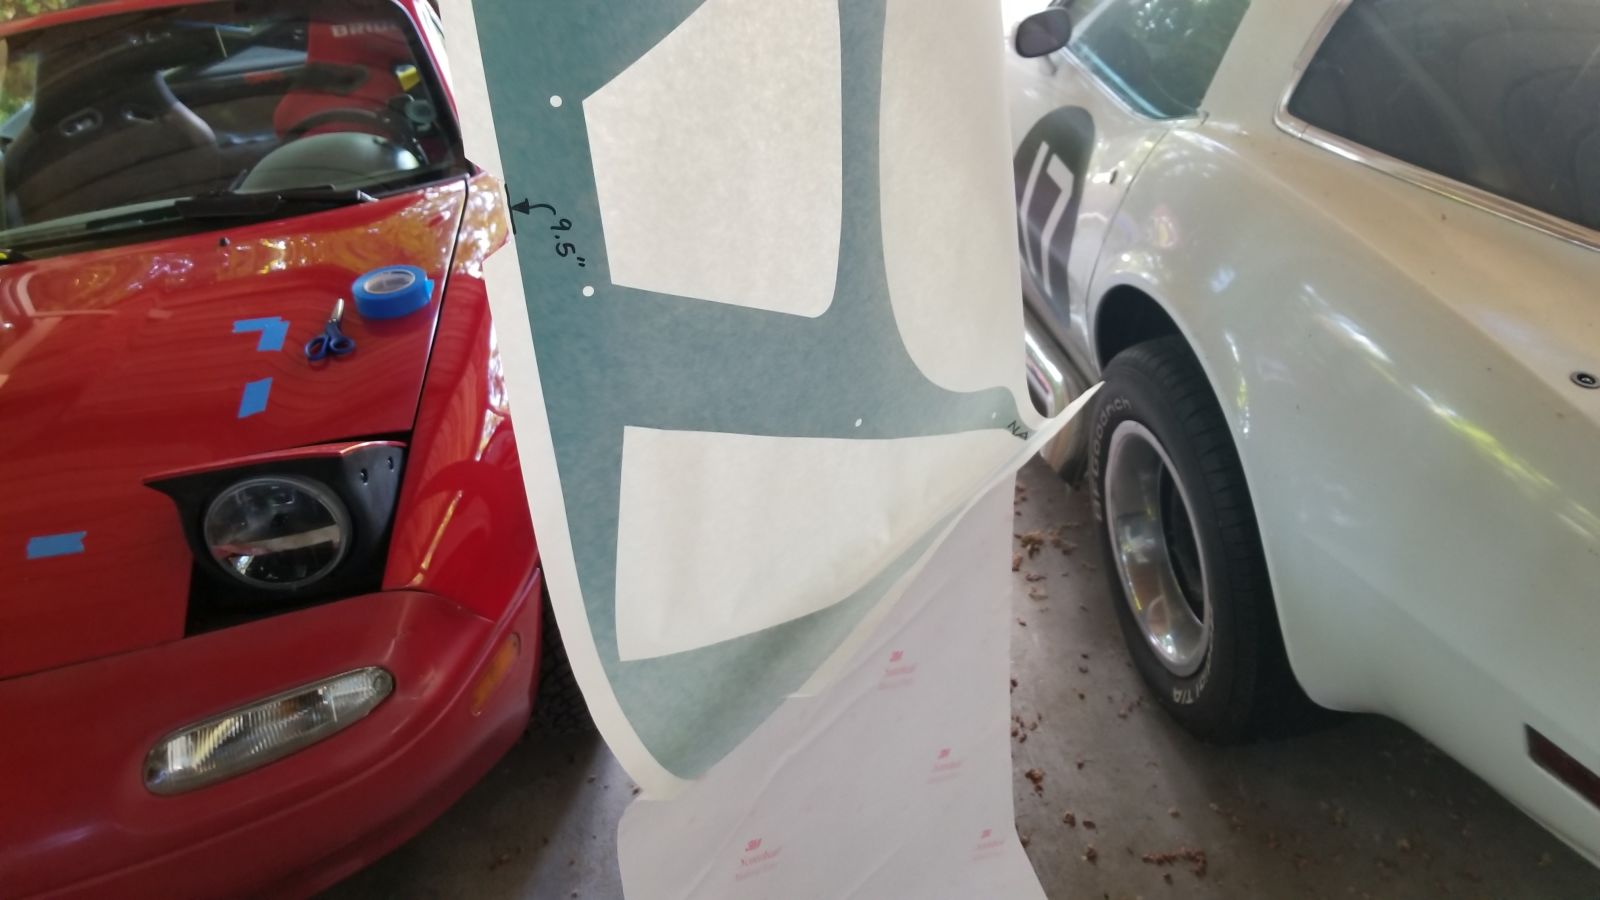 Applying the vinyl was the scariest part. Not joking, I’ve screwed up not one, but three windshield banners. This is not where my talents lay... 